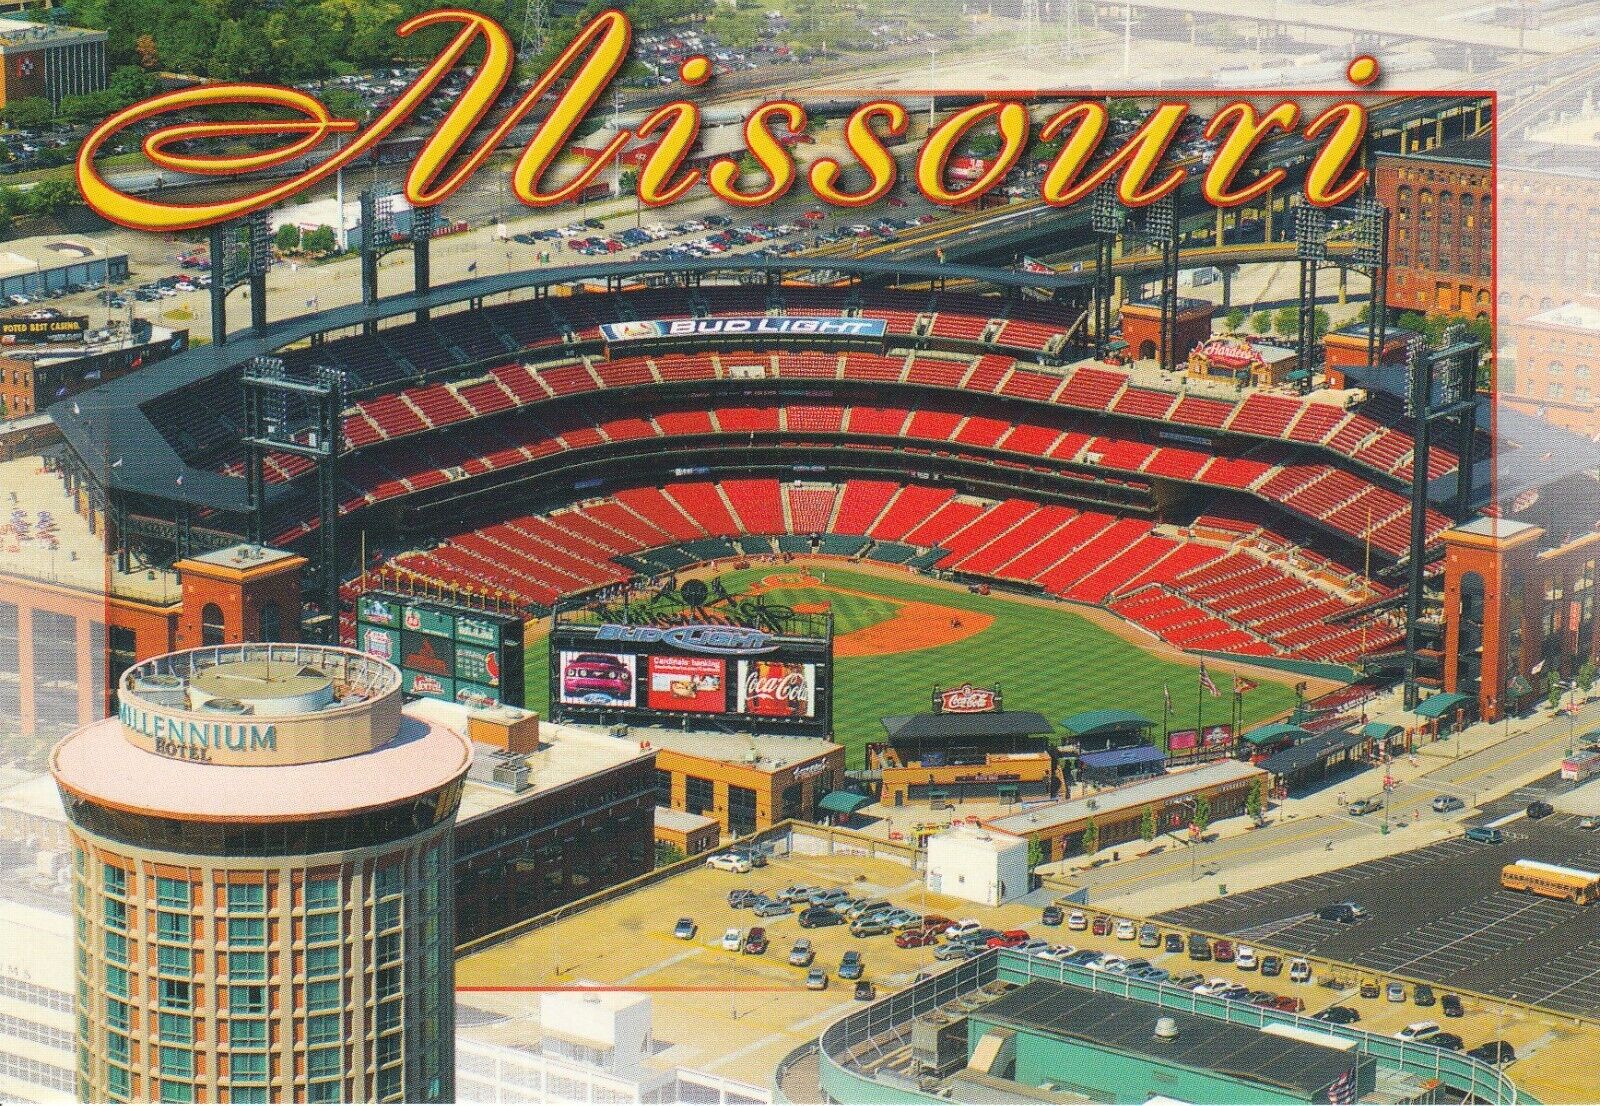 Gateway Arch View of Busch Stadium - Home of the MLB St. Louis Cardinals